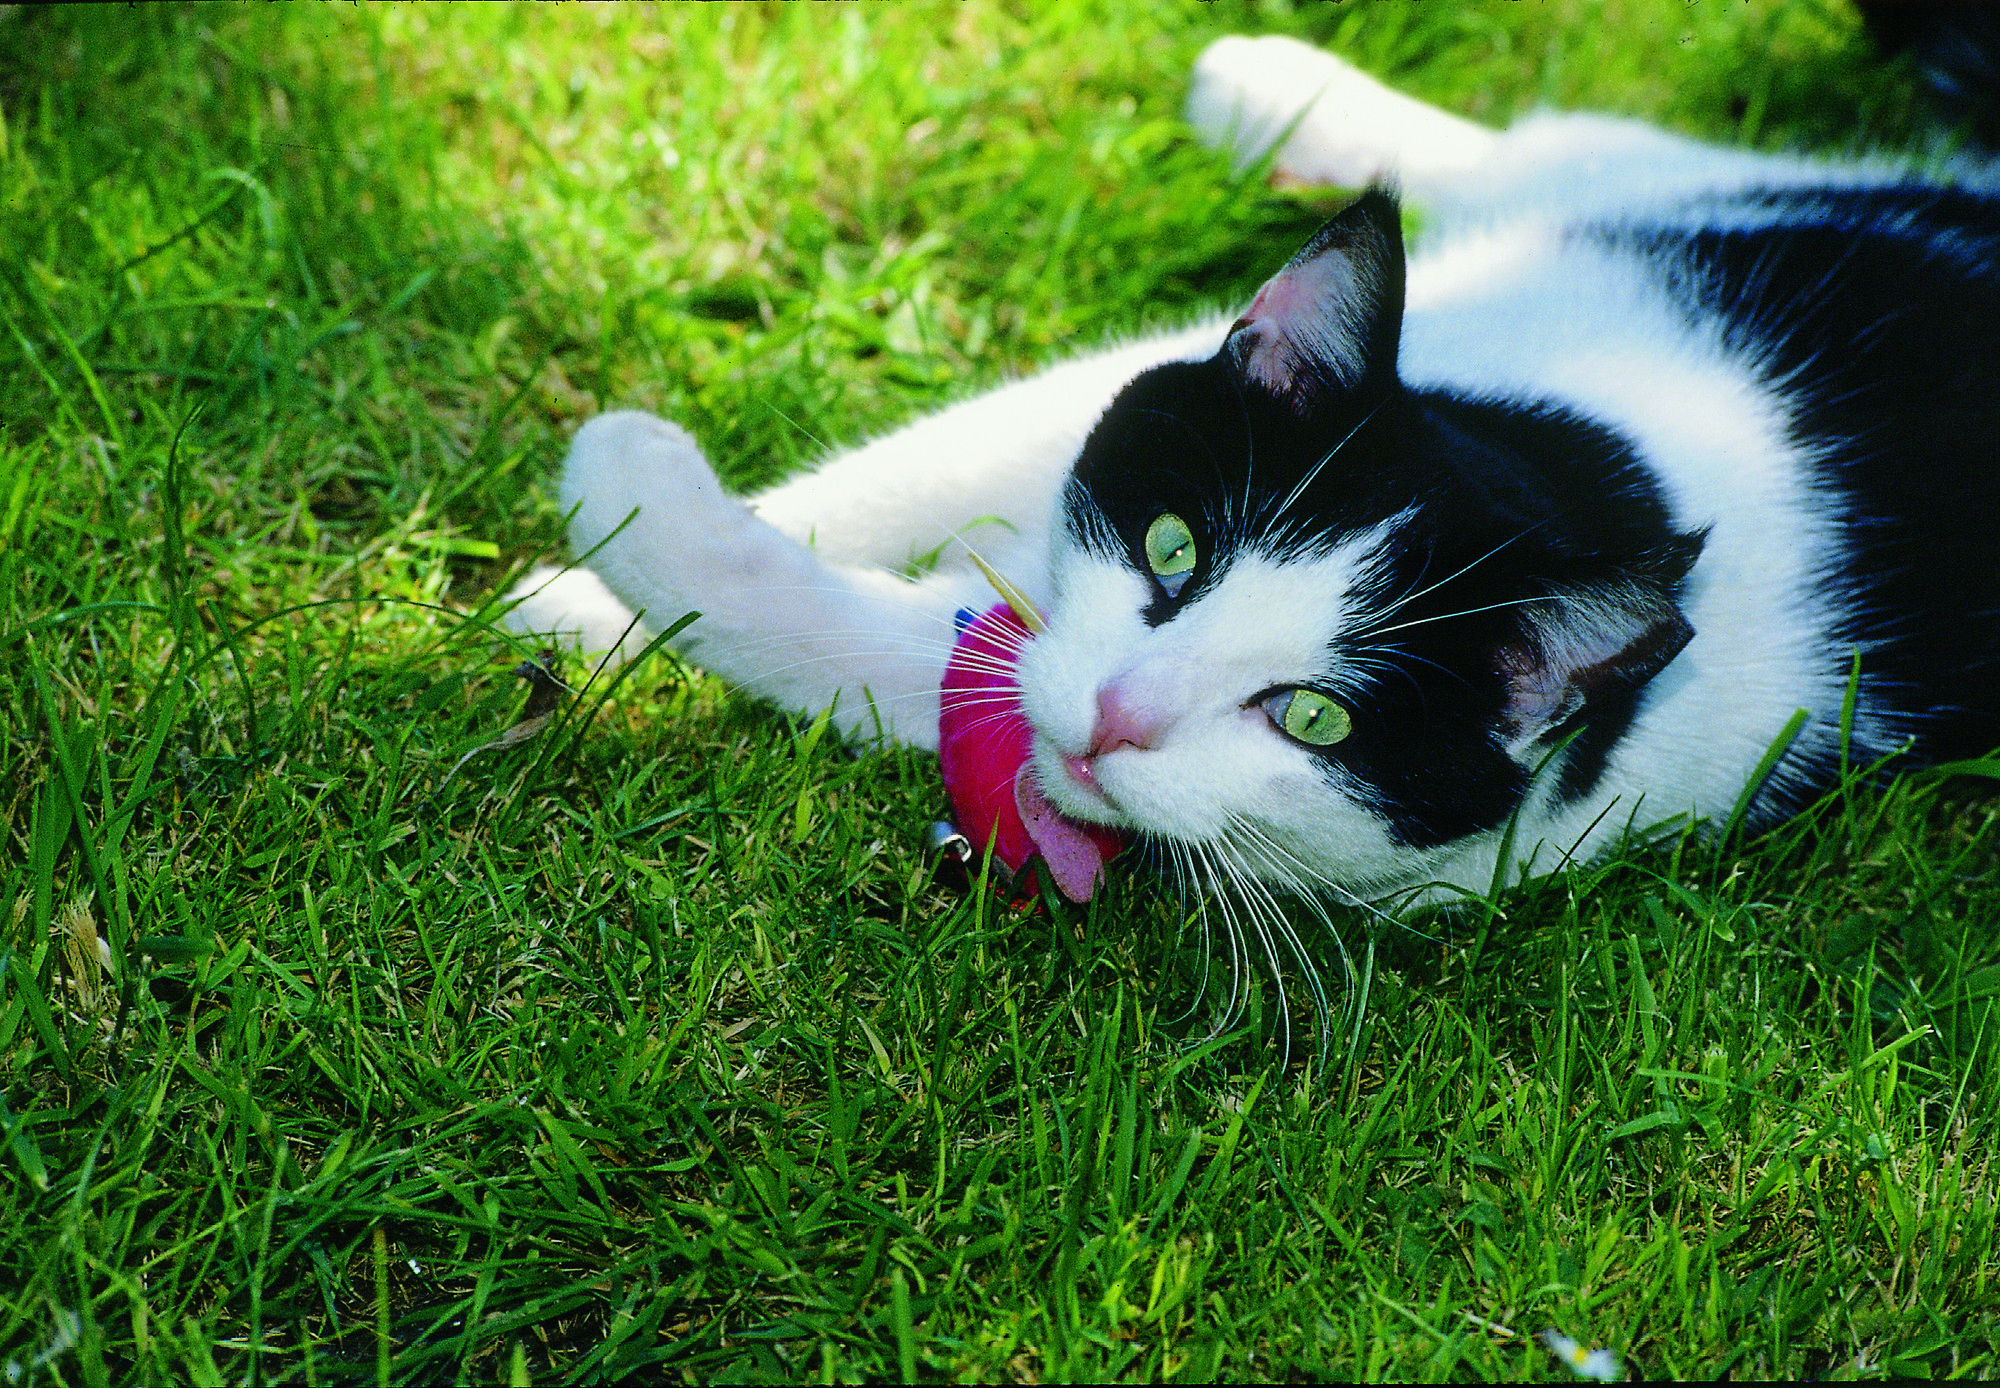 Black and white cat on grass